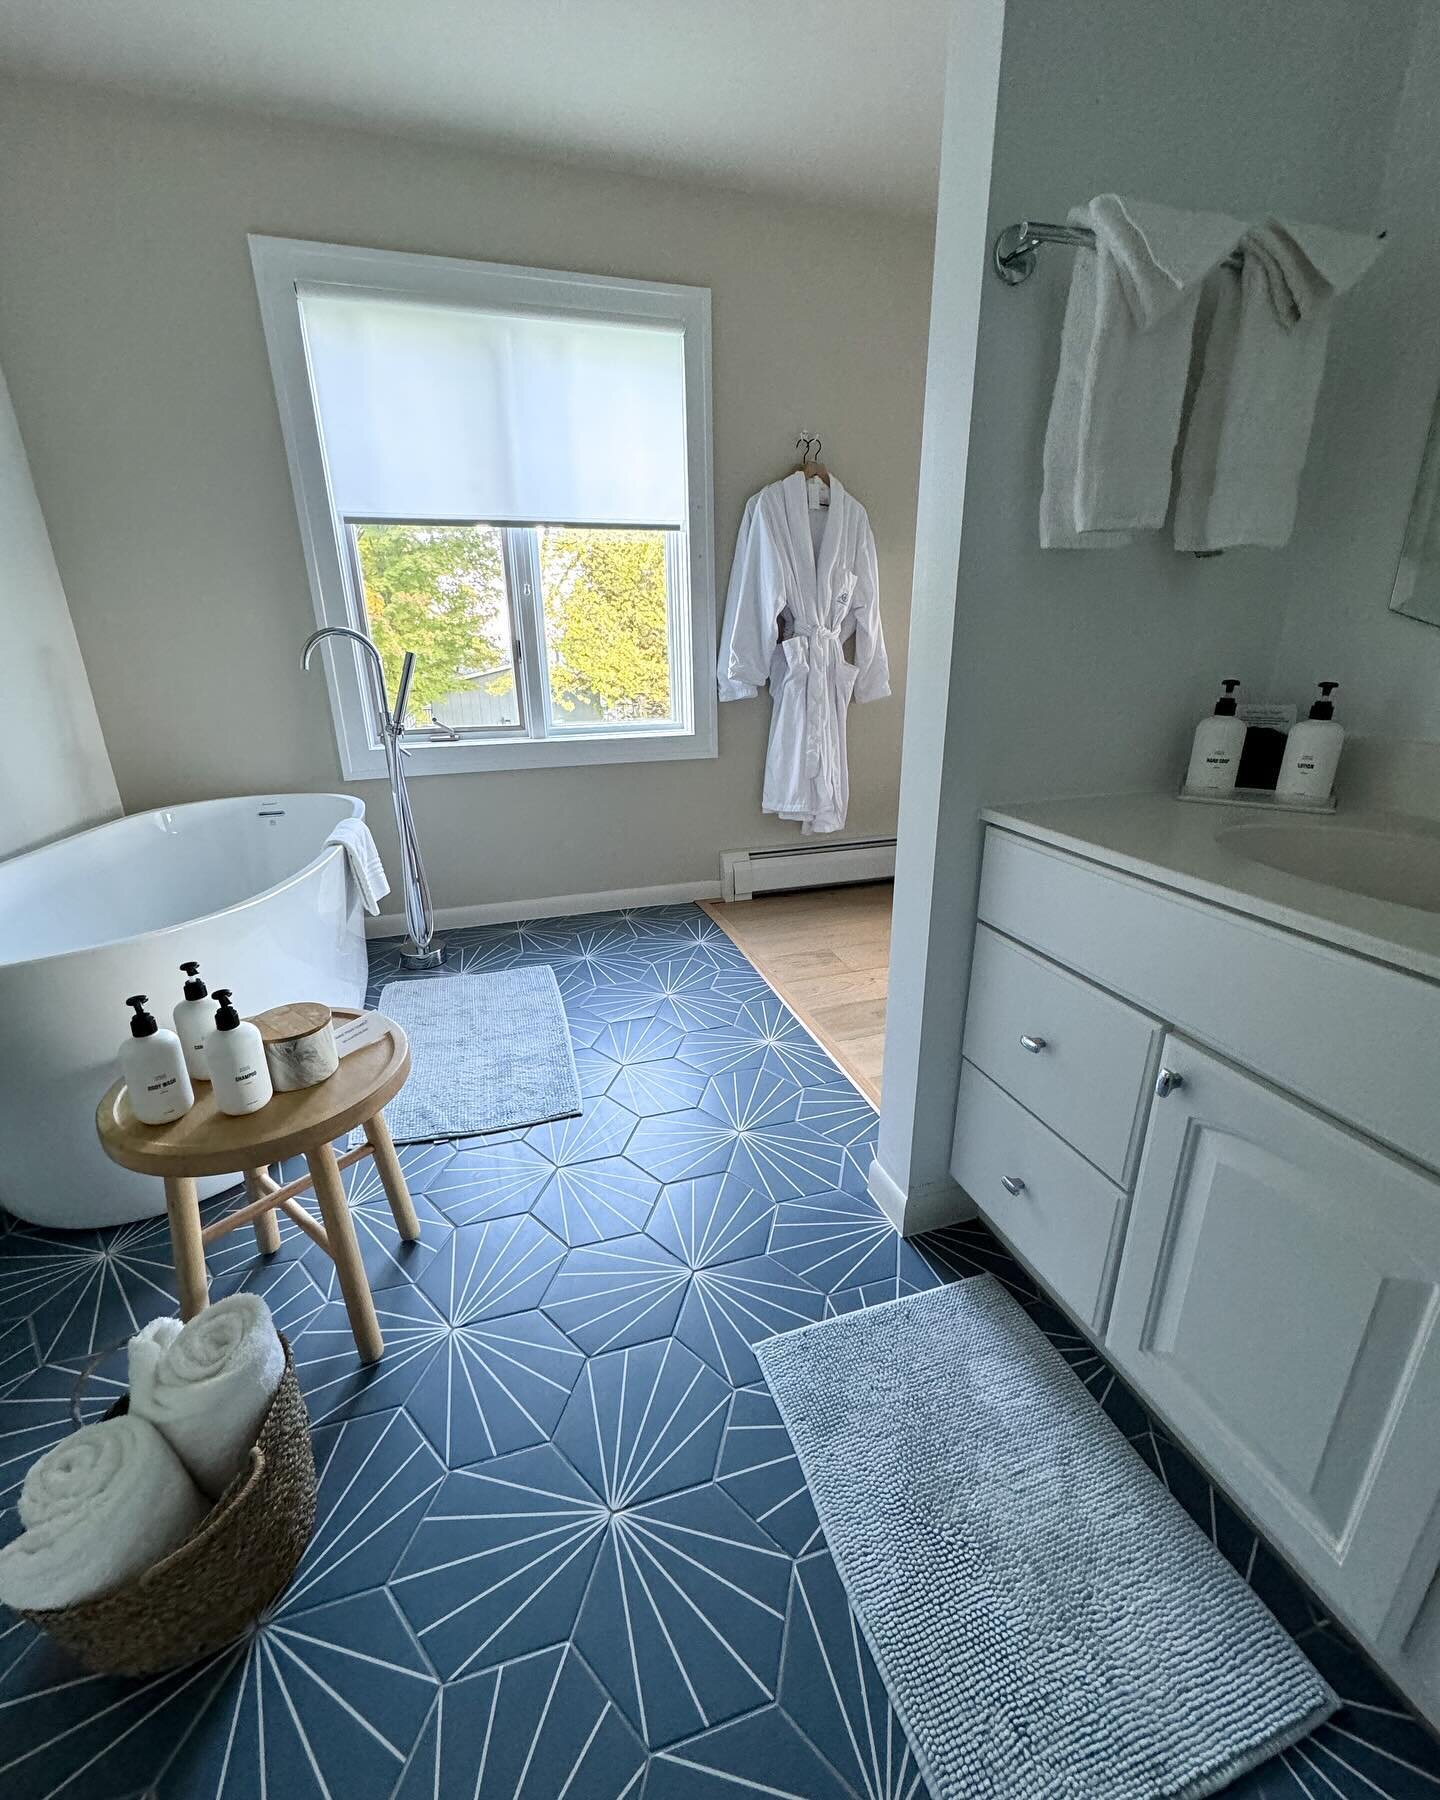 Now you can plan the perfect @bayfield_wi vacation with our newly launched website that helps you navigate our collective  with a #chooseyourownadventure way of finding the perfect lodging pairing. This spa like suite at Steeple Hill can be found und